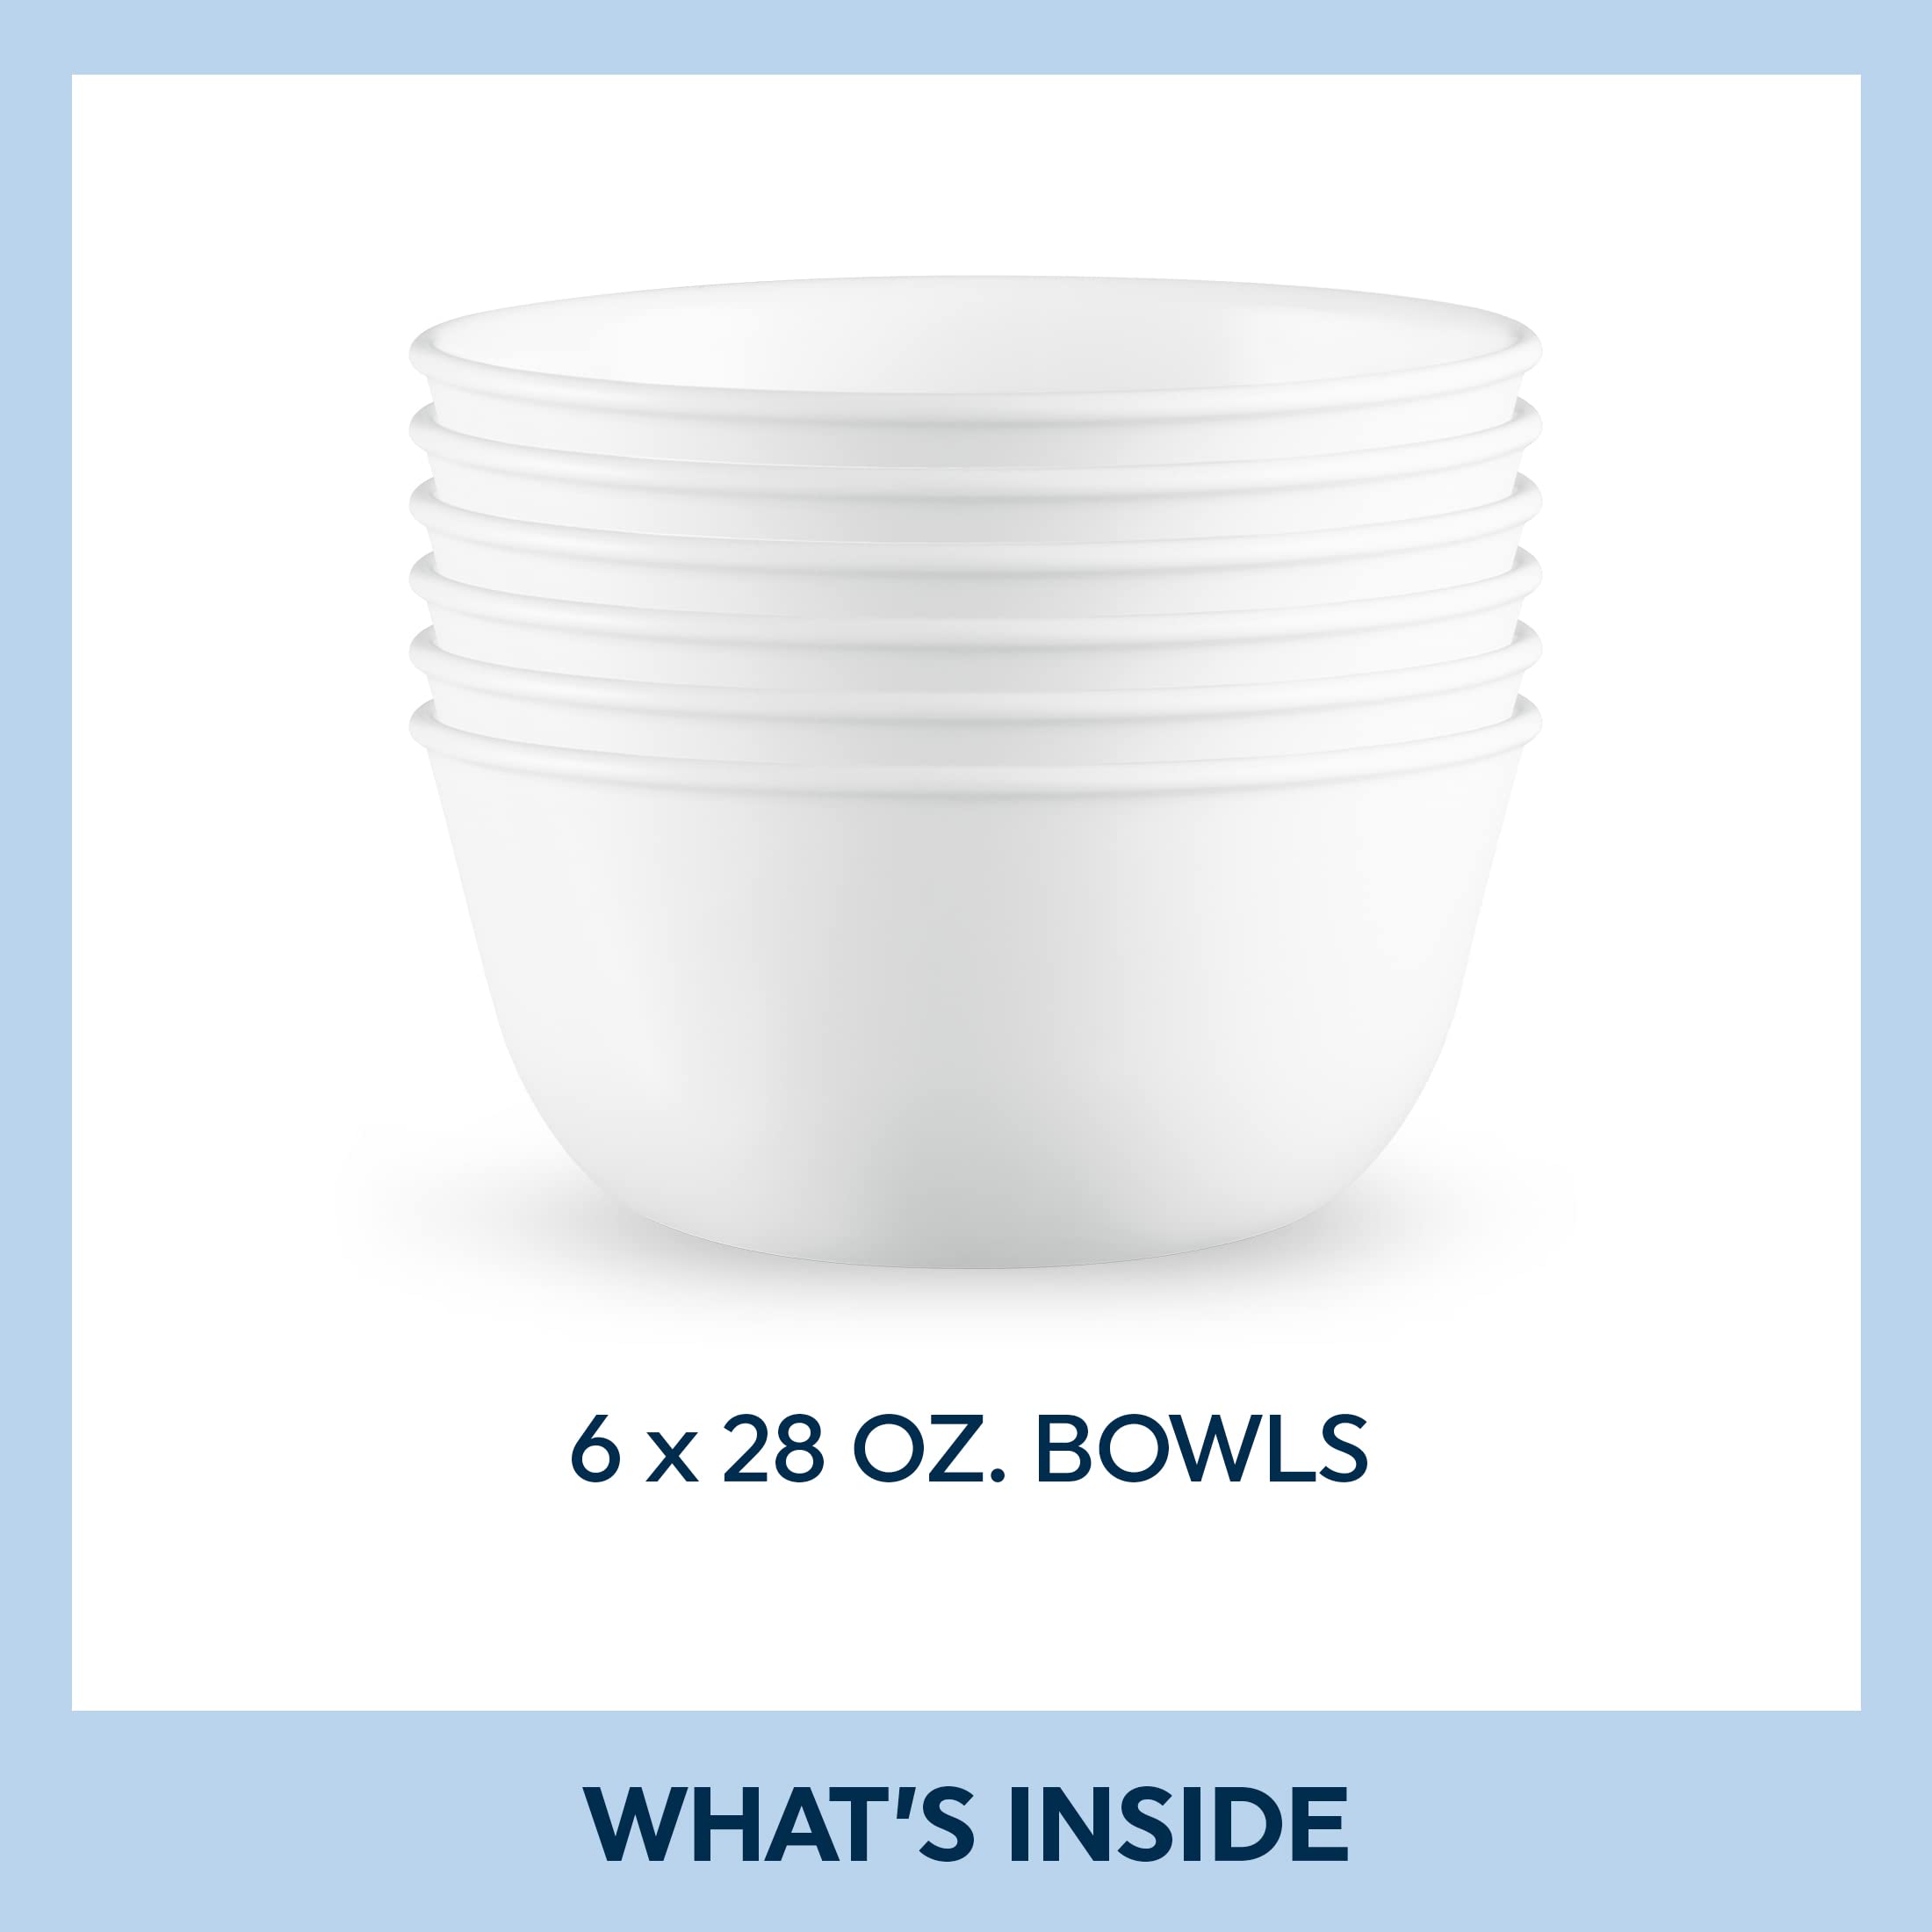 Corelle Vitrelle 28-oz Soup/Cereal Bowls Set of 6, Winter Frost White & 4-Pc Meal Bowls Set, Service for 4, Durable and Eco-Friendly 9-1/4-Inch Bowls, Compact Stack Bowl Set, White